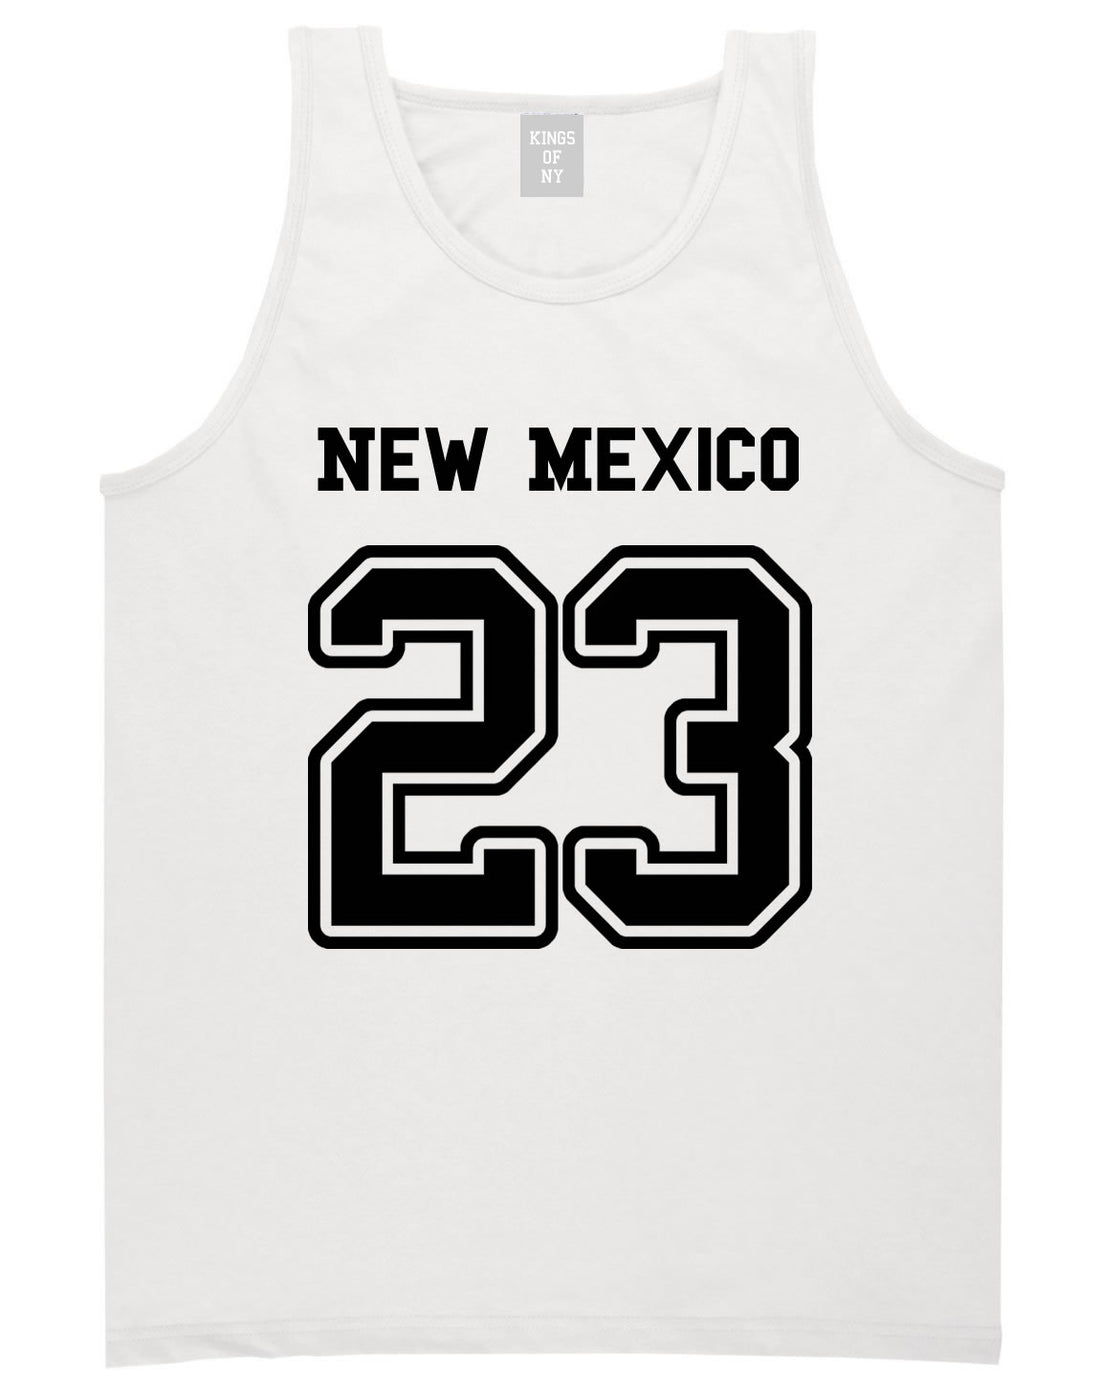 Sport Style New Mexico 23 Team State Jersey Mens Tank Top By Kings Of NY